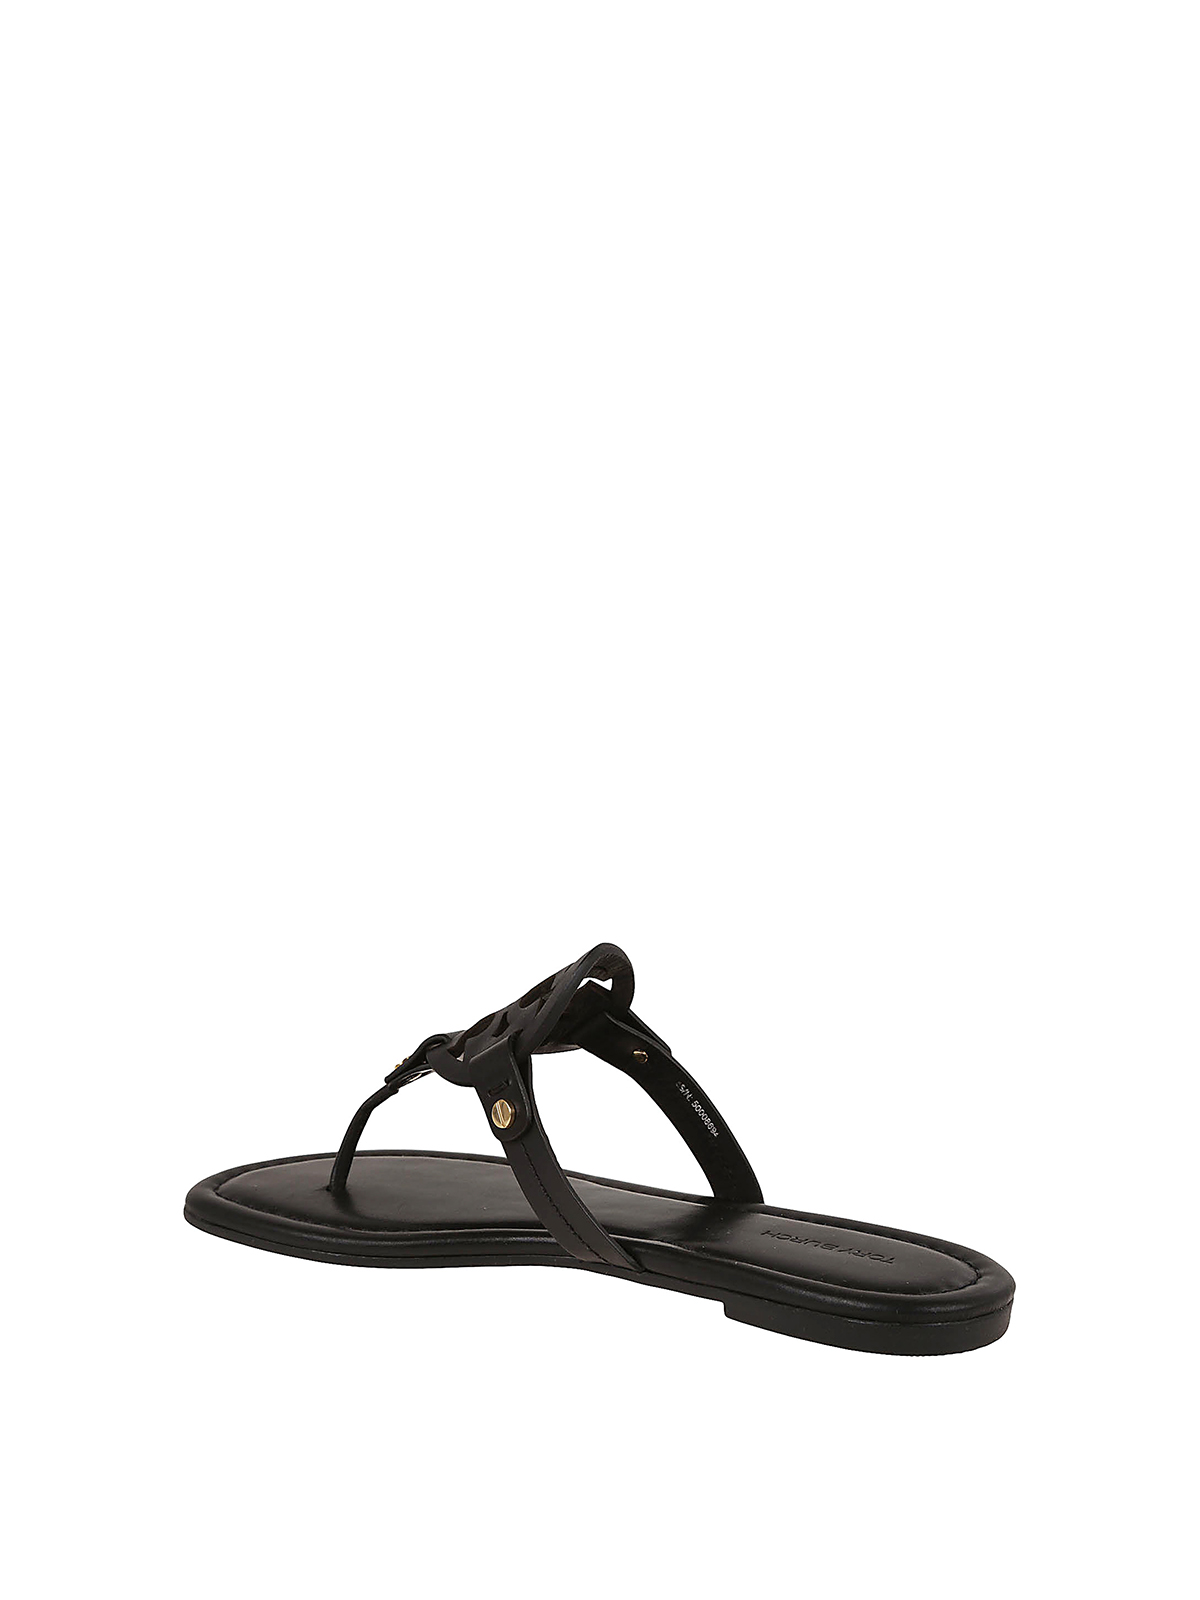 Sandals Tory Burch - Leather sandals - 50008694001 | Shop online at iKRIX